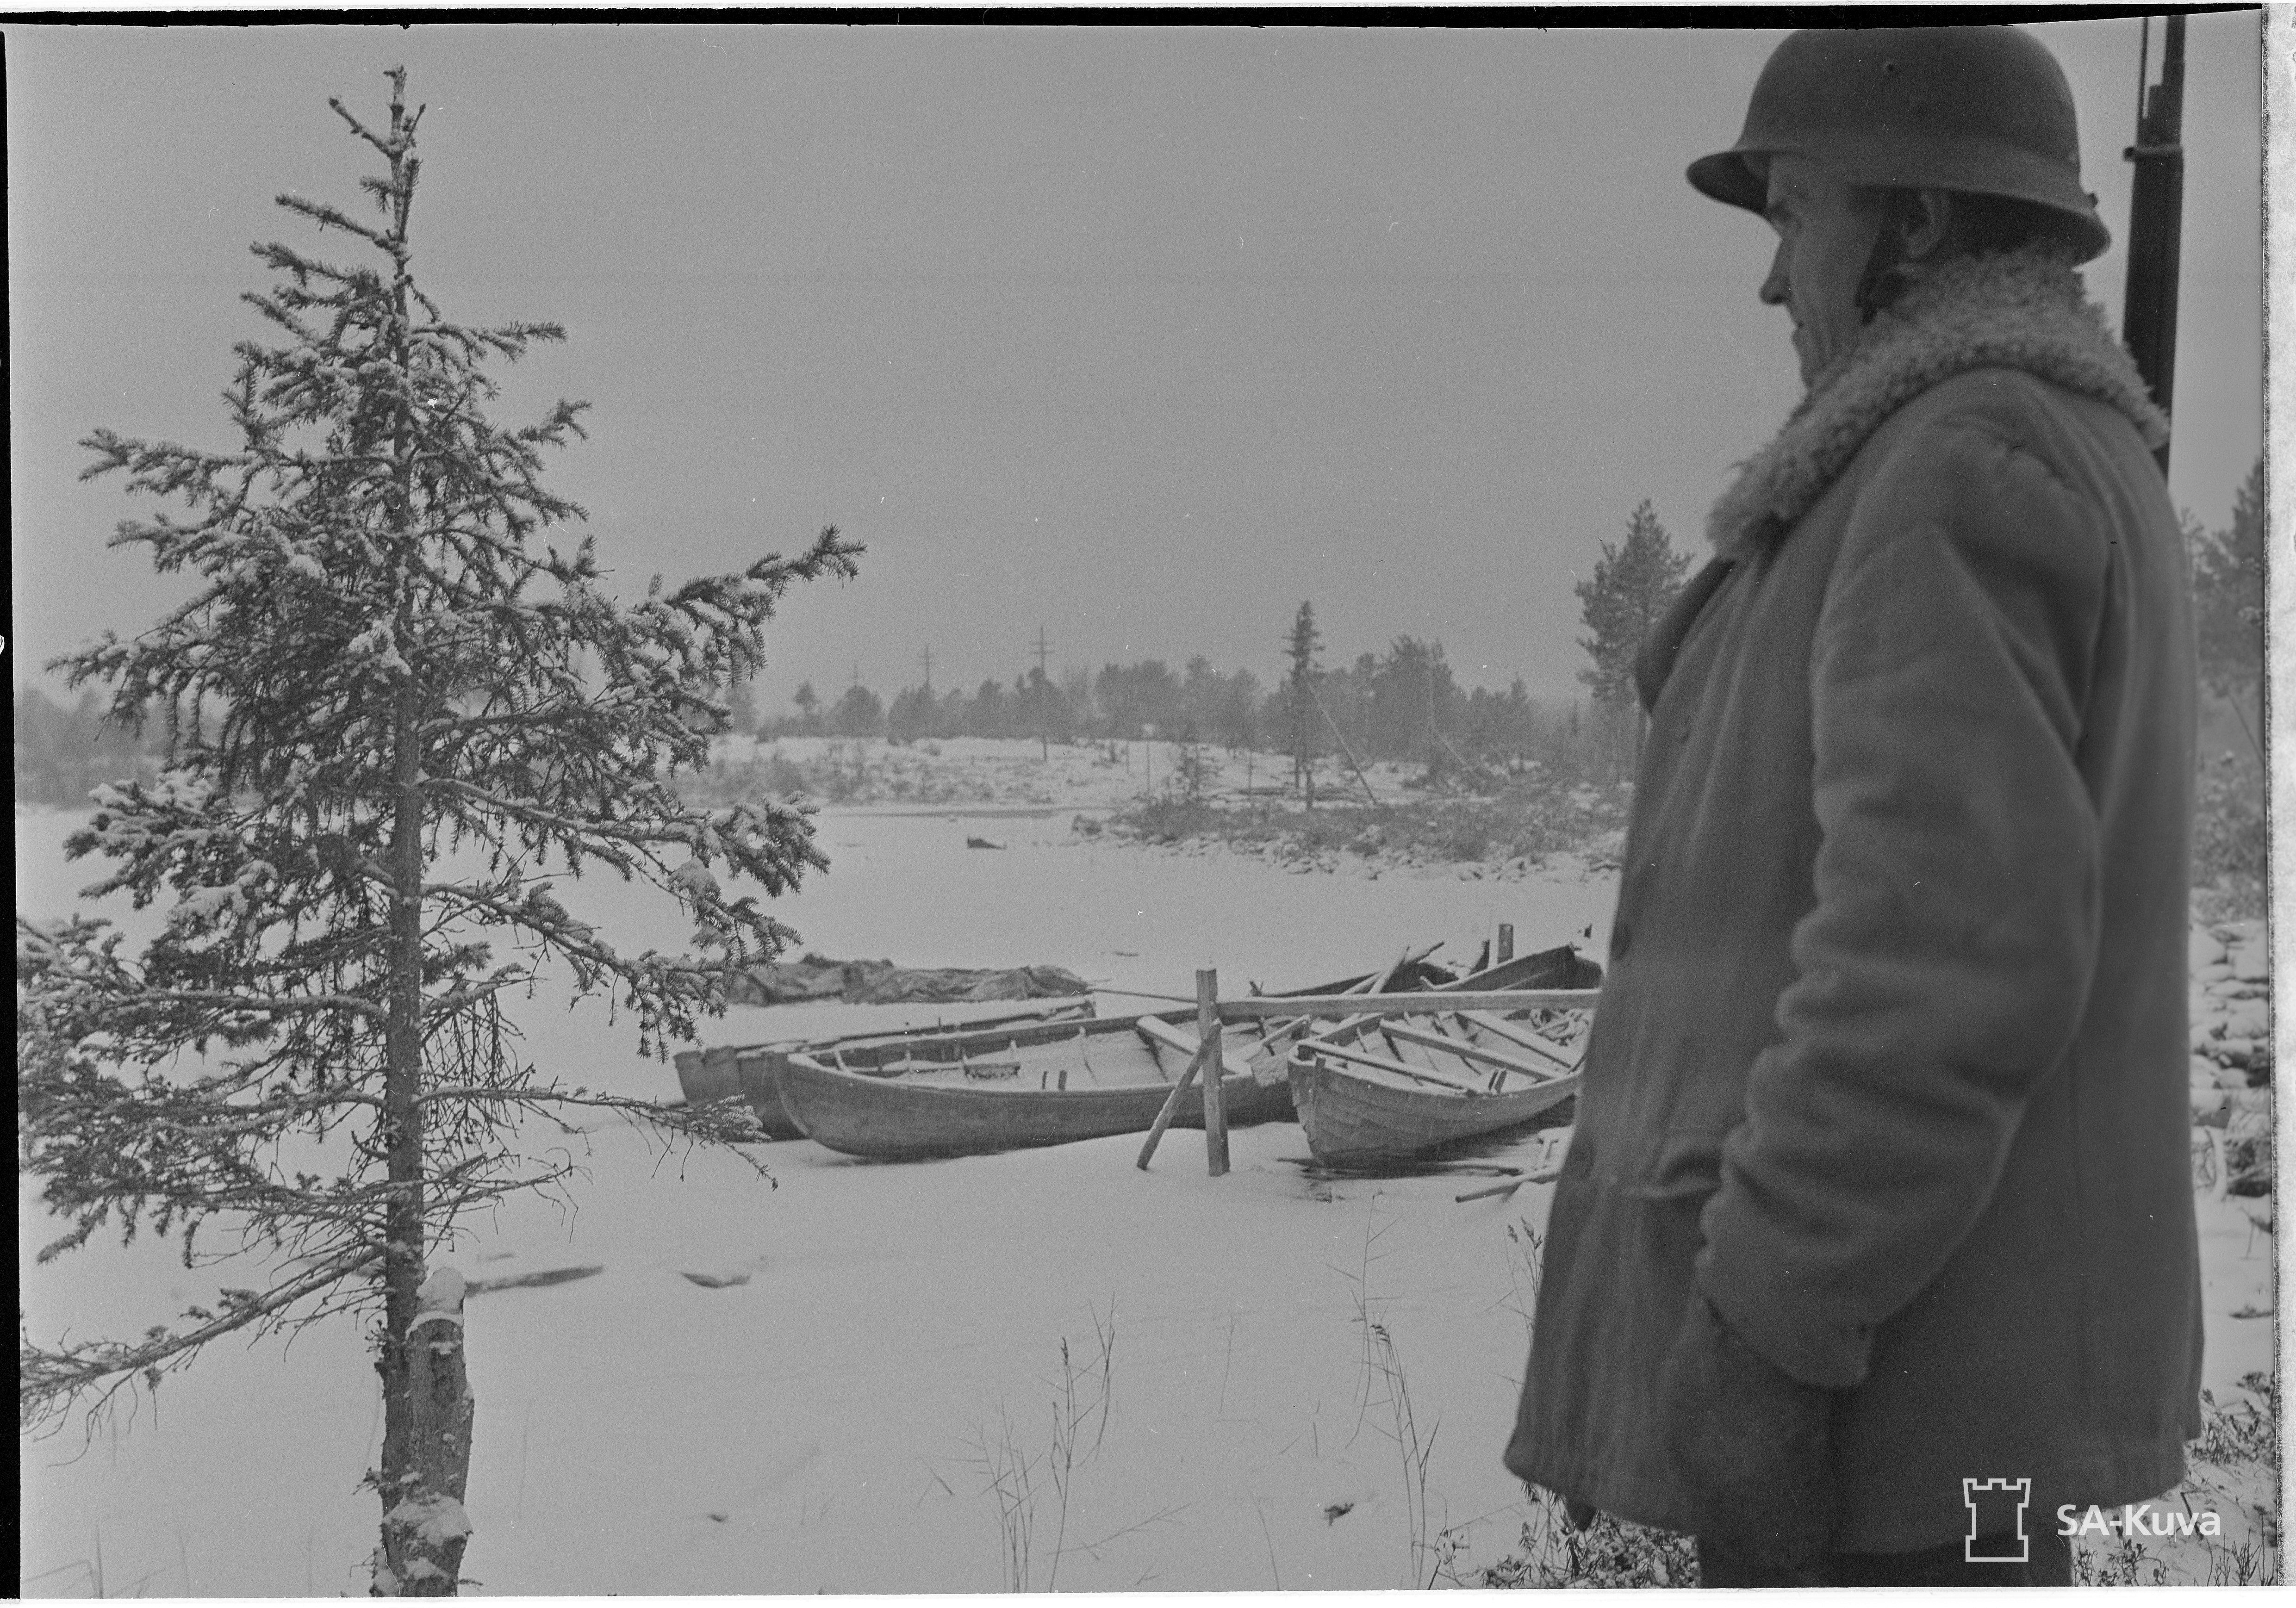 A Finnish soldier in guard on the beach of Tulppajärvi, the first snow has arrived and boats have been drawn from the frozen lakes to the countries.